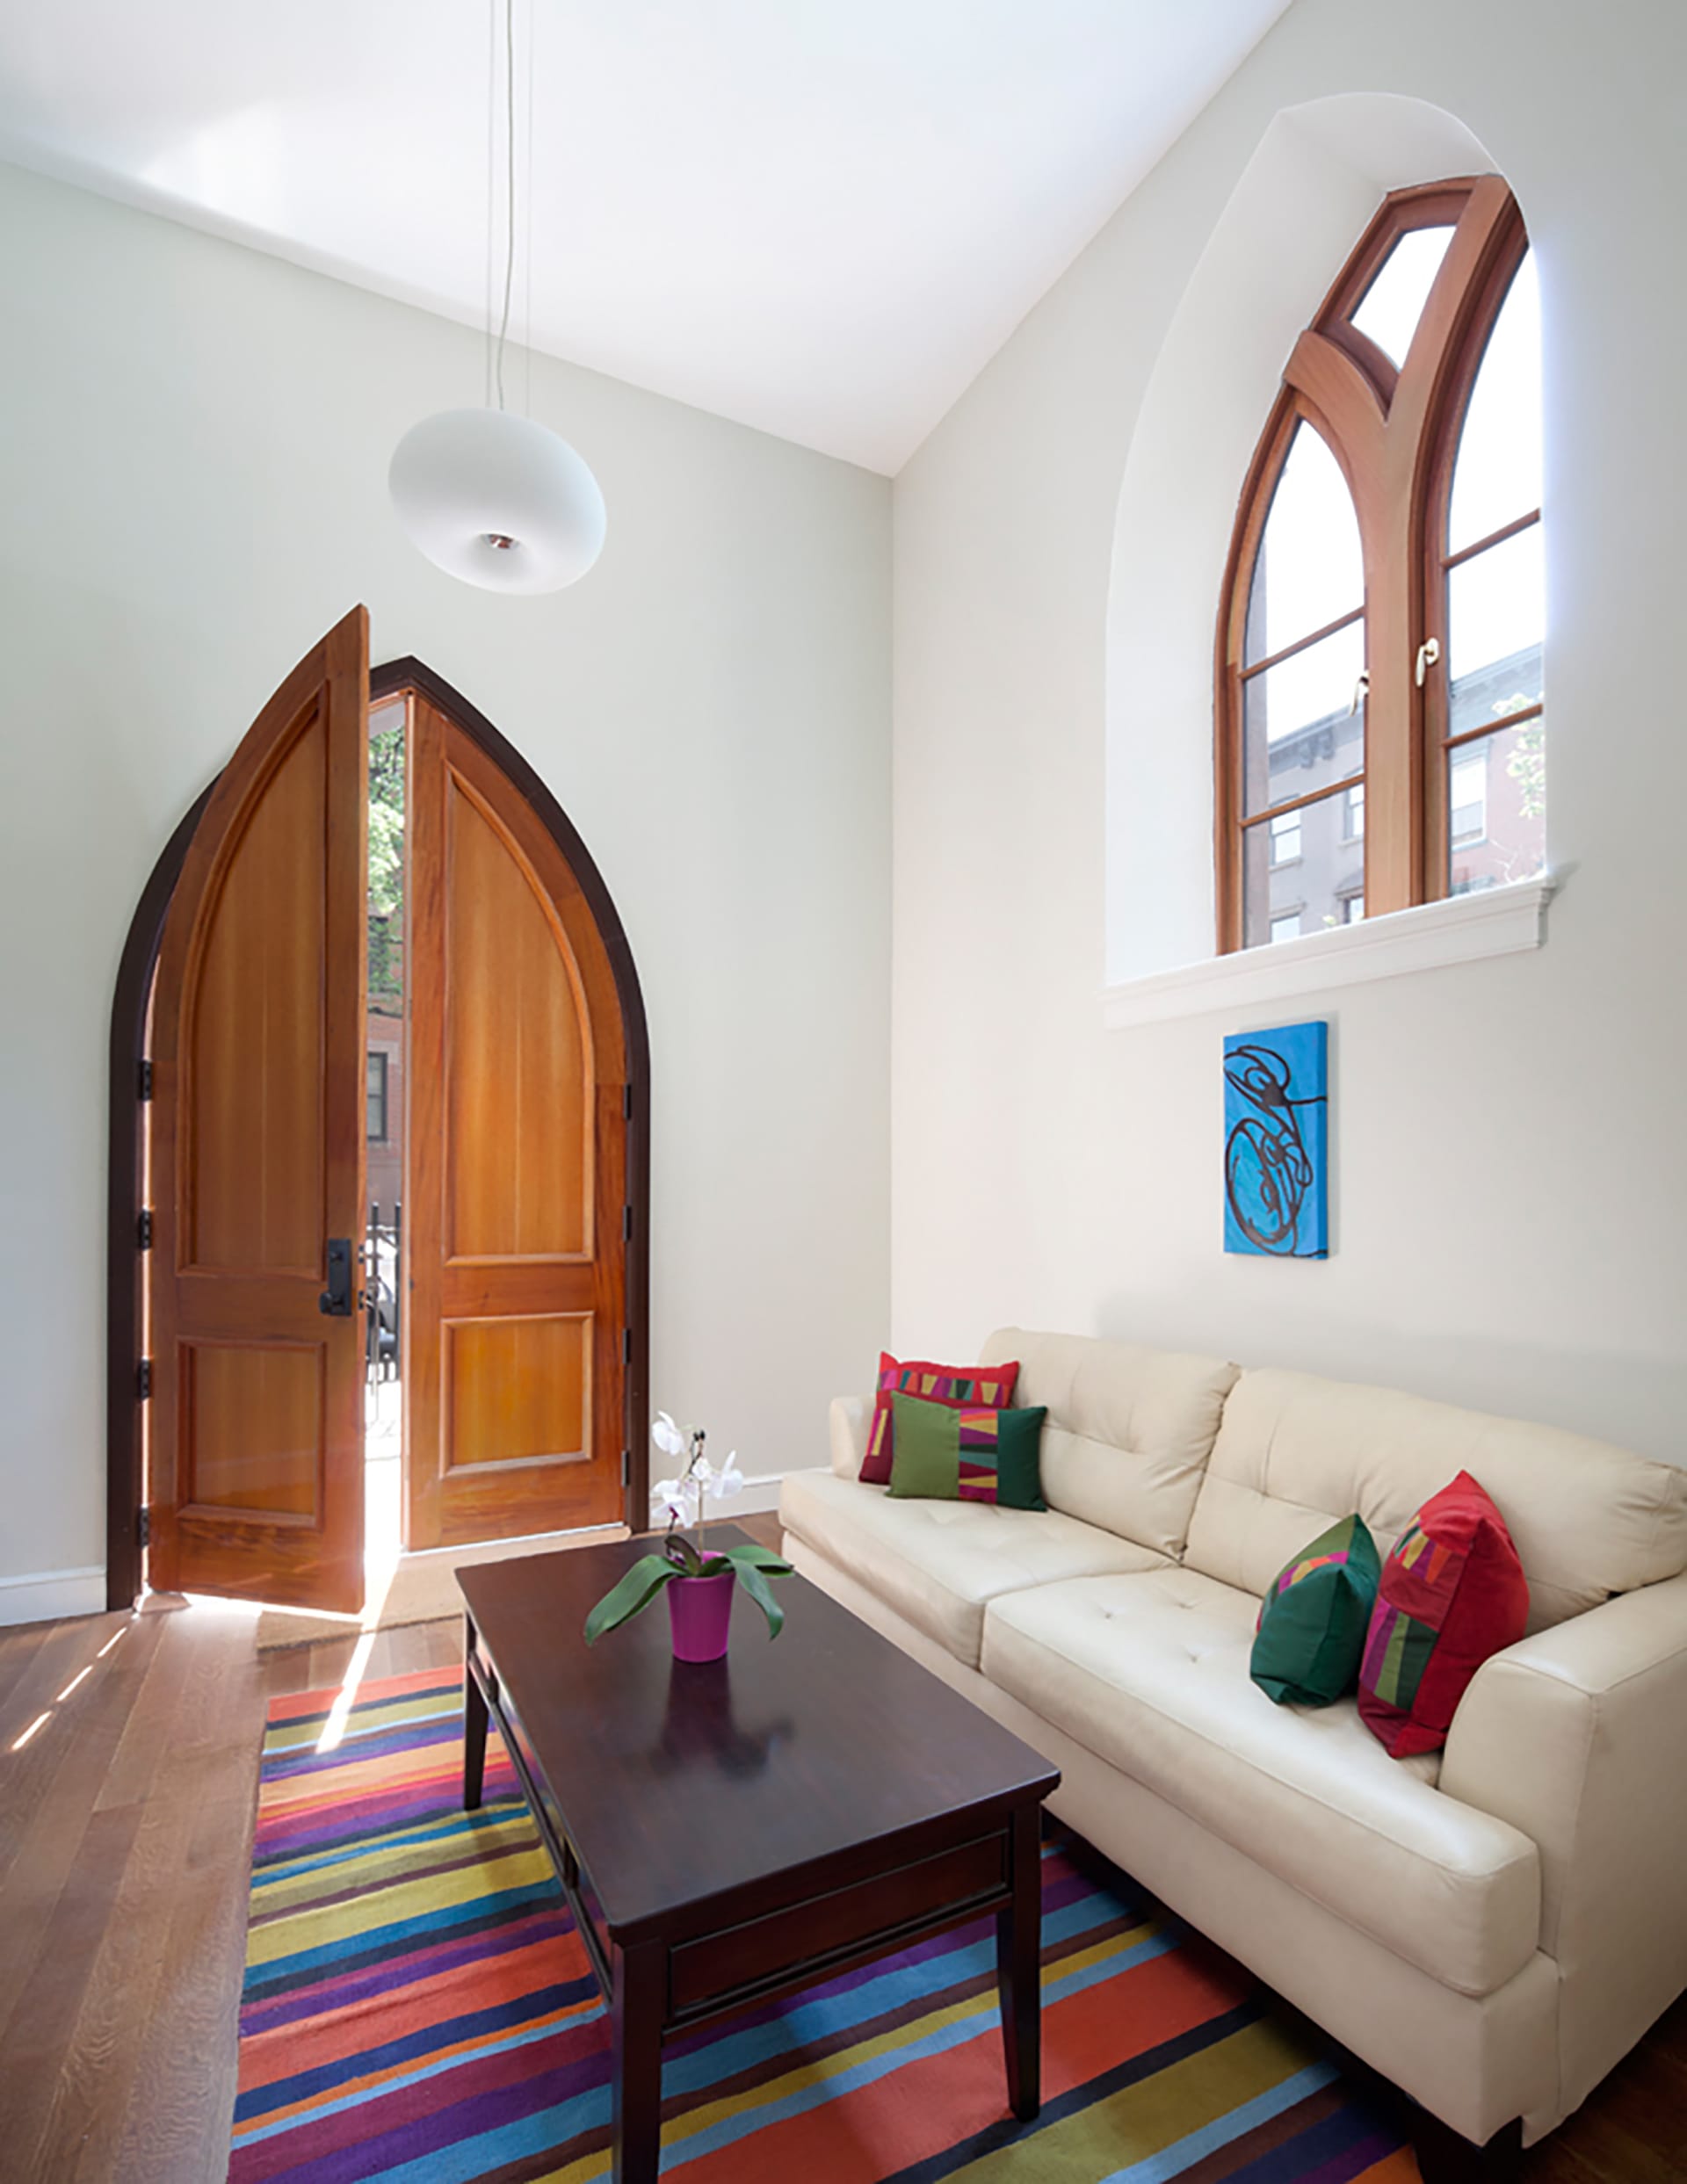 Restored doorway with a pointed arch top and a new window in a Brooklyn adaptive reuse condo conversion